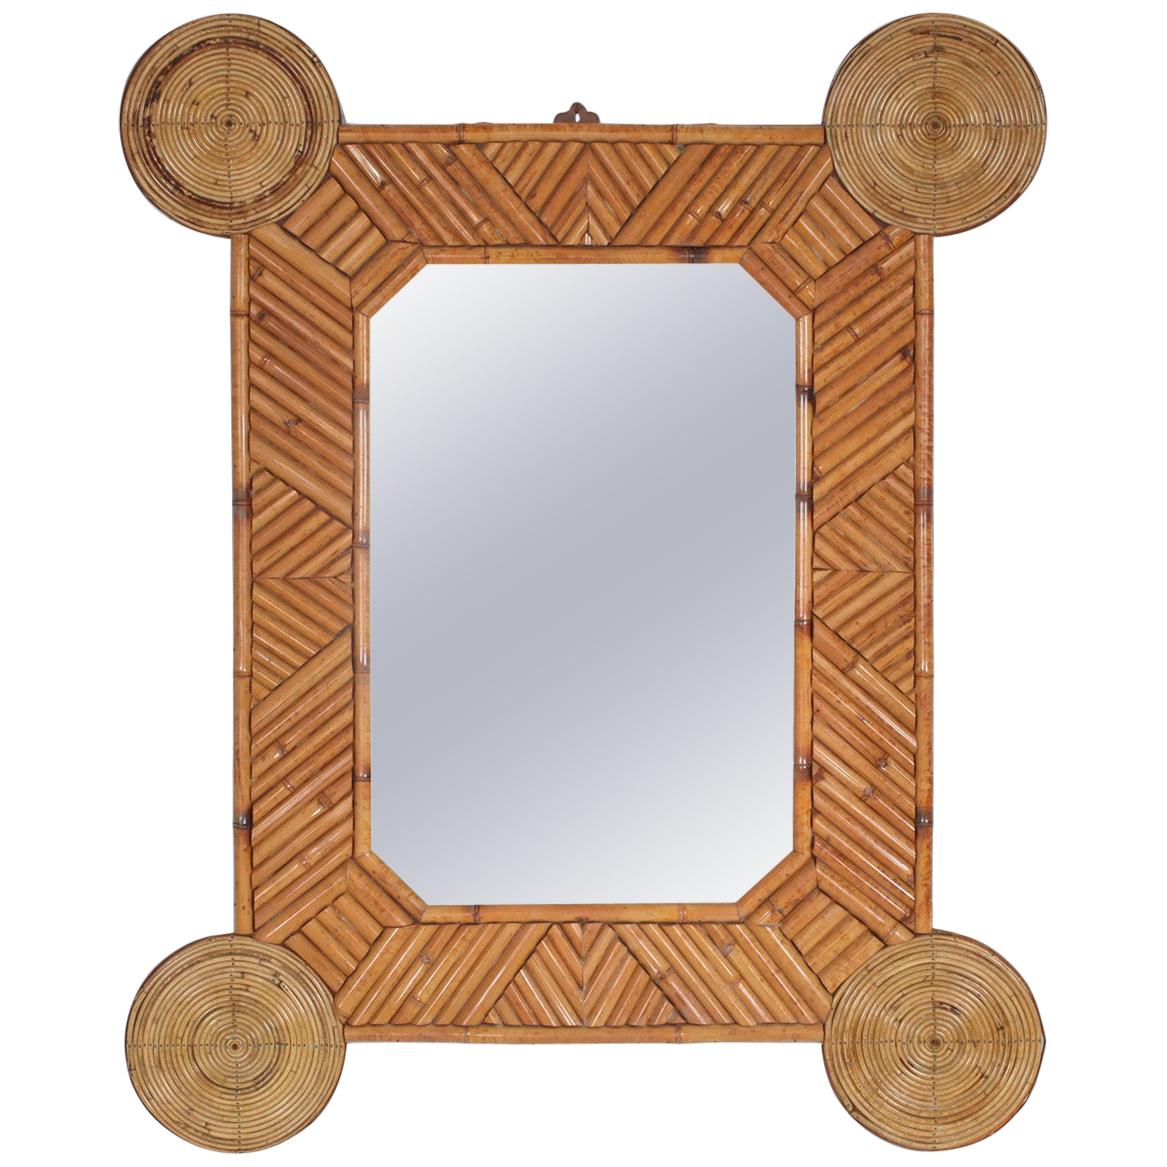 Bamboo and Rattan Mirror by Arpex, Italy